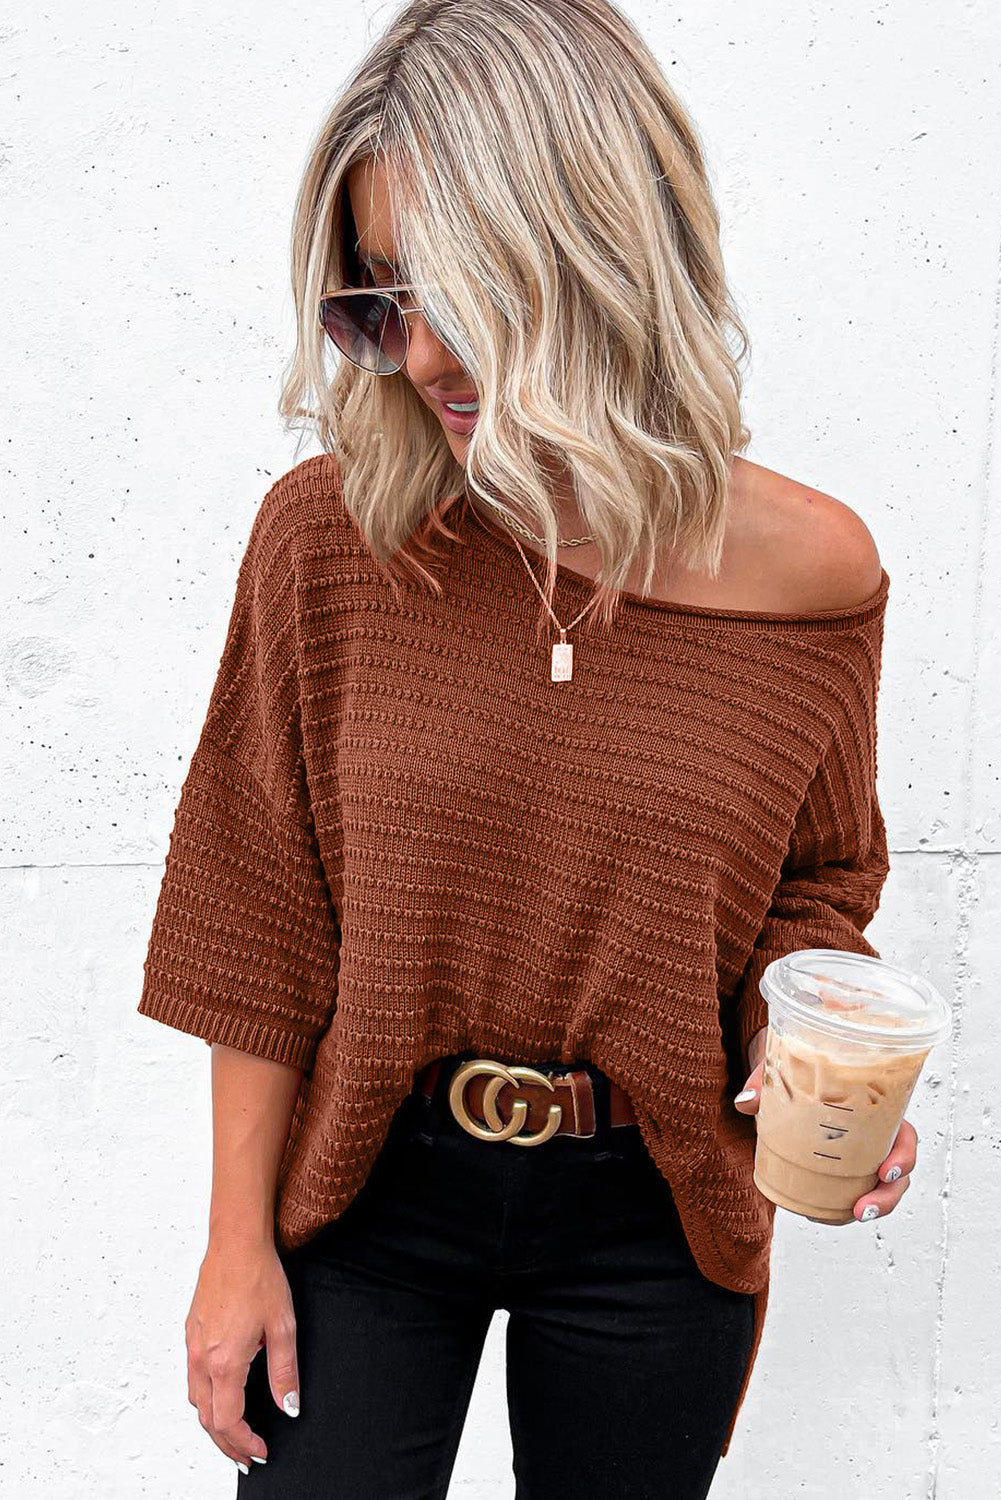 Apricot Casual Solid Rib-Knit Short Sleeve Top